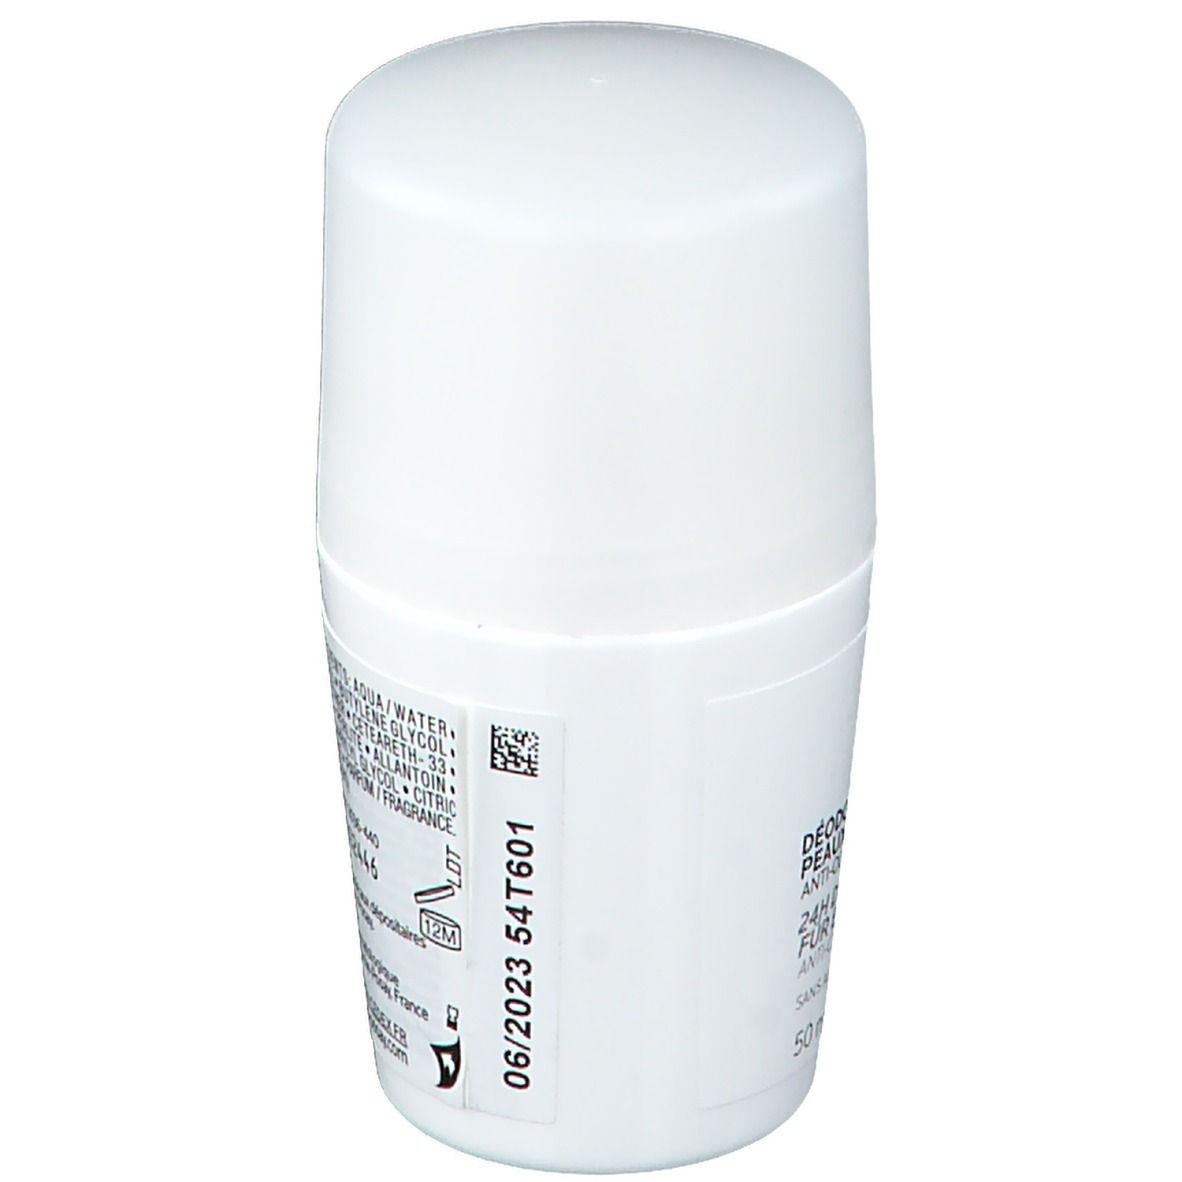 La Roche-Posay Physiologisches Deodorant 24h Roll On